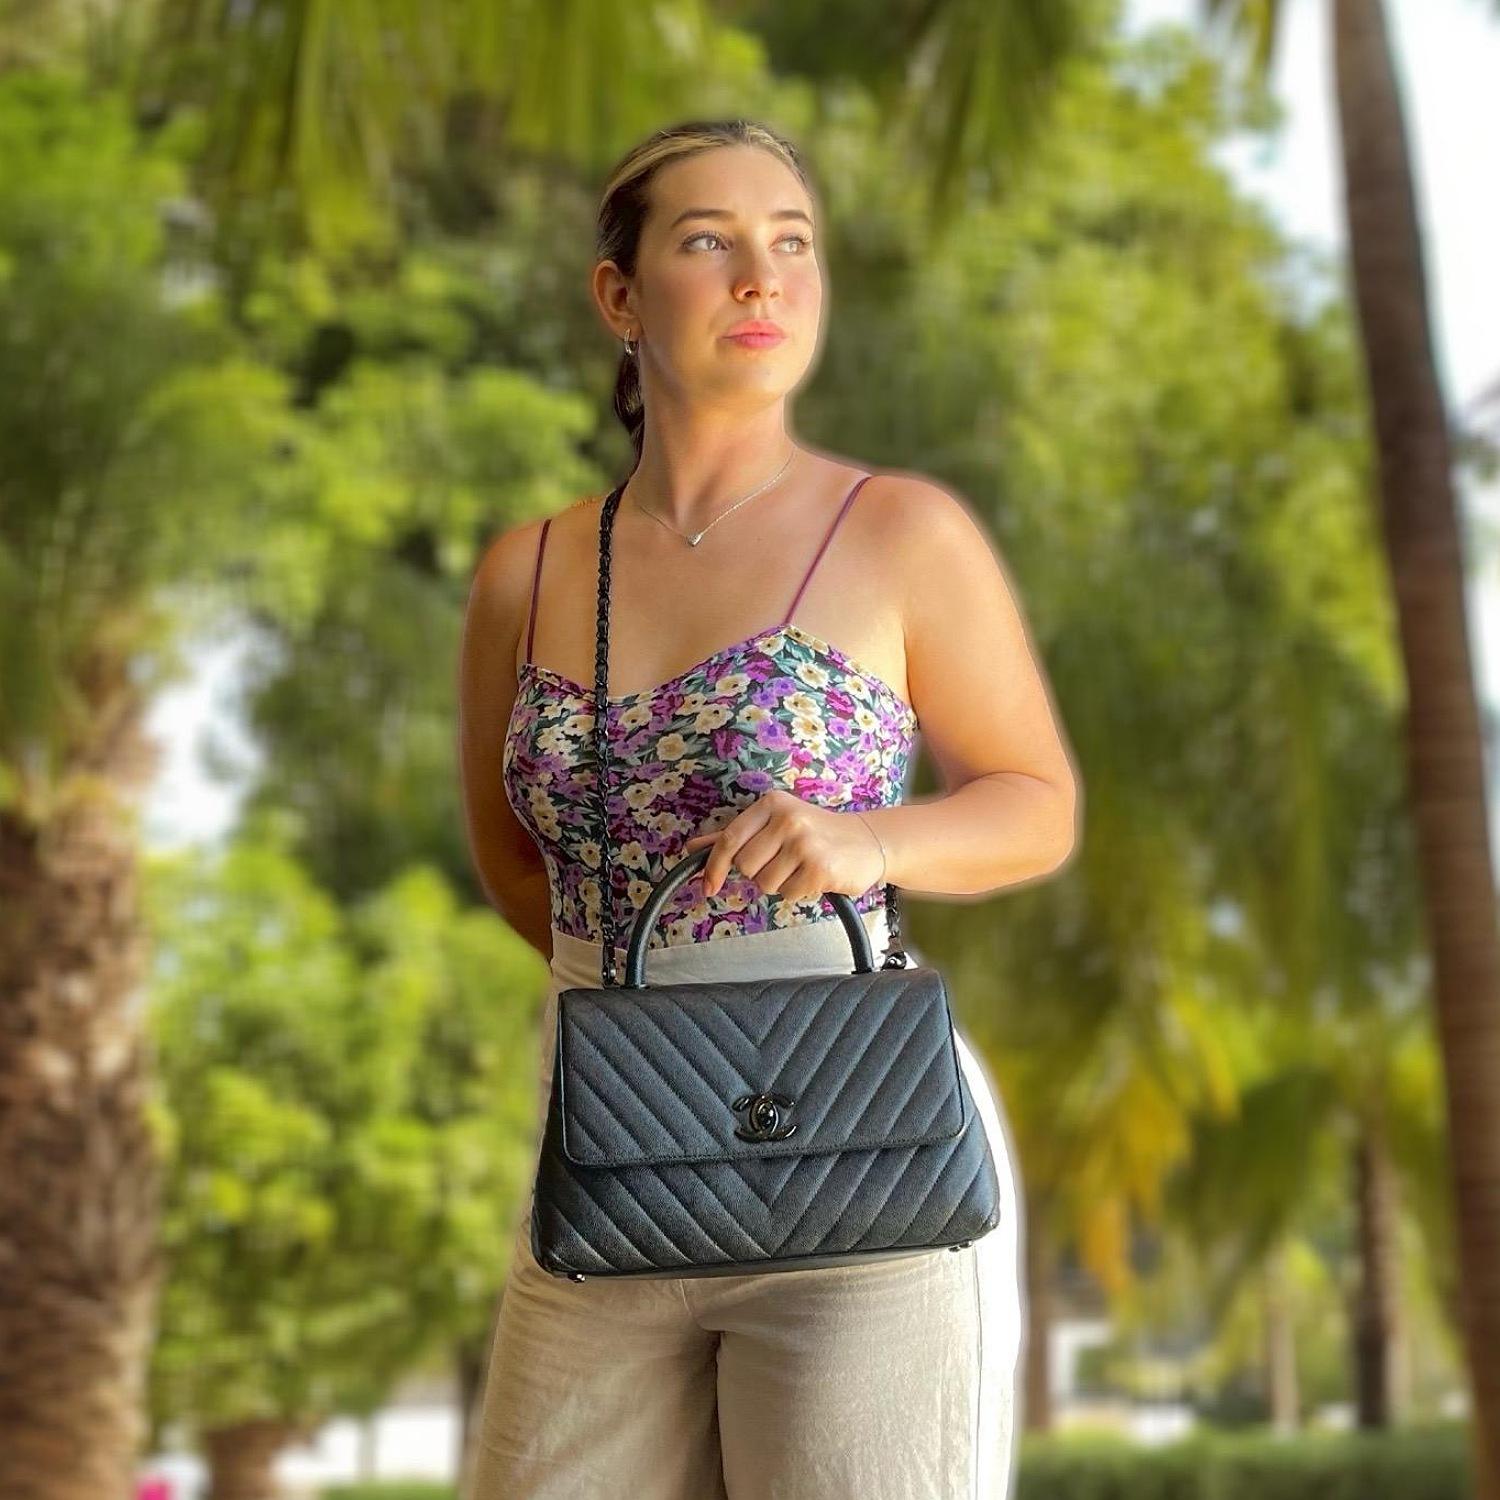 This chic tote is crafted of diamond stitched grained caviar calfskin leather in gunmetal. The shoulder bag features a sturdy leather top handle, a black chain link leather threaded shoulder strap with a shoulder pad, a rear patch pocket, and a